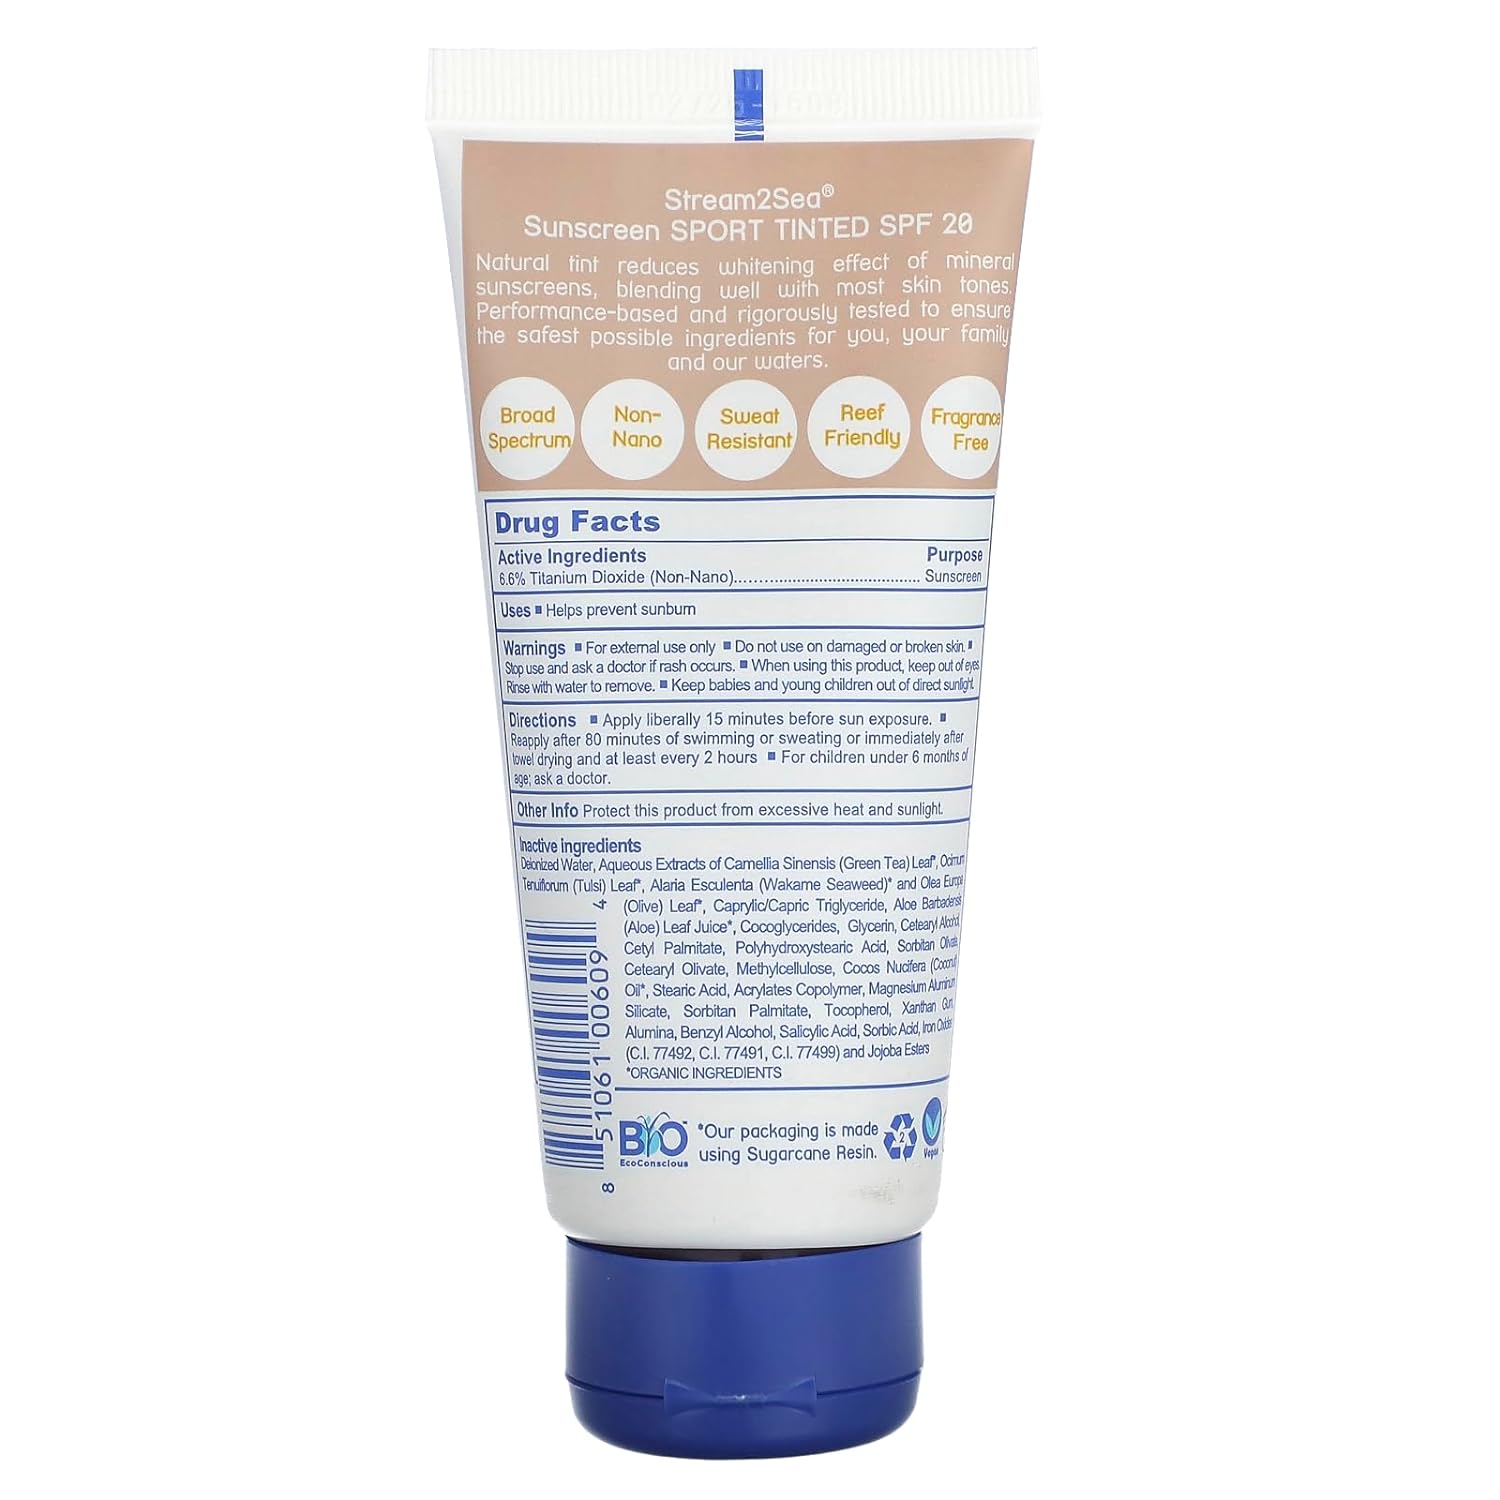 STREAM 2 SEA Tinted Sunscreen with SPF 20 All Natural, Biodegradable and Reef Safe, 3 Fl oz Travel Size Paraben Free Non Greasy and Moisturizing Sunscreen For Face, Body Protection Against UVA and UVB : Beauty & Personal Care